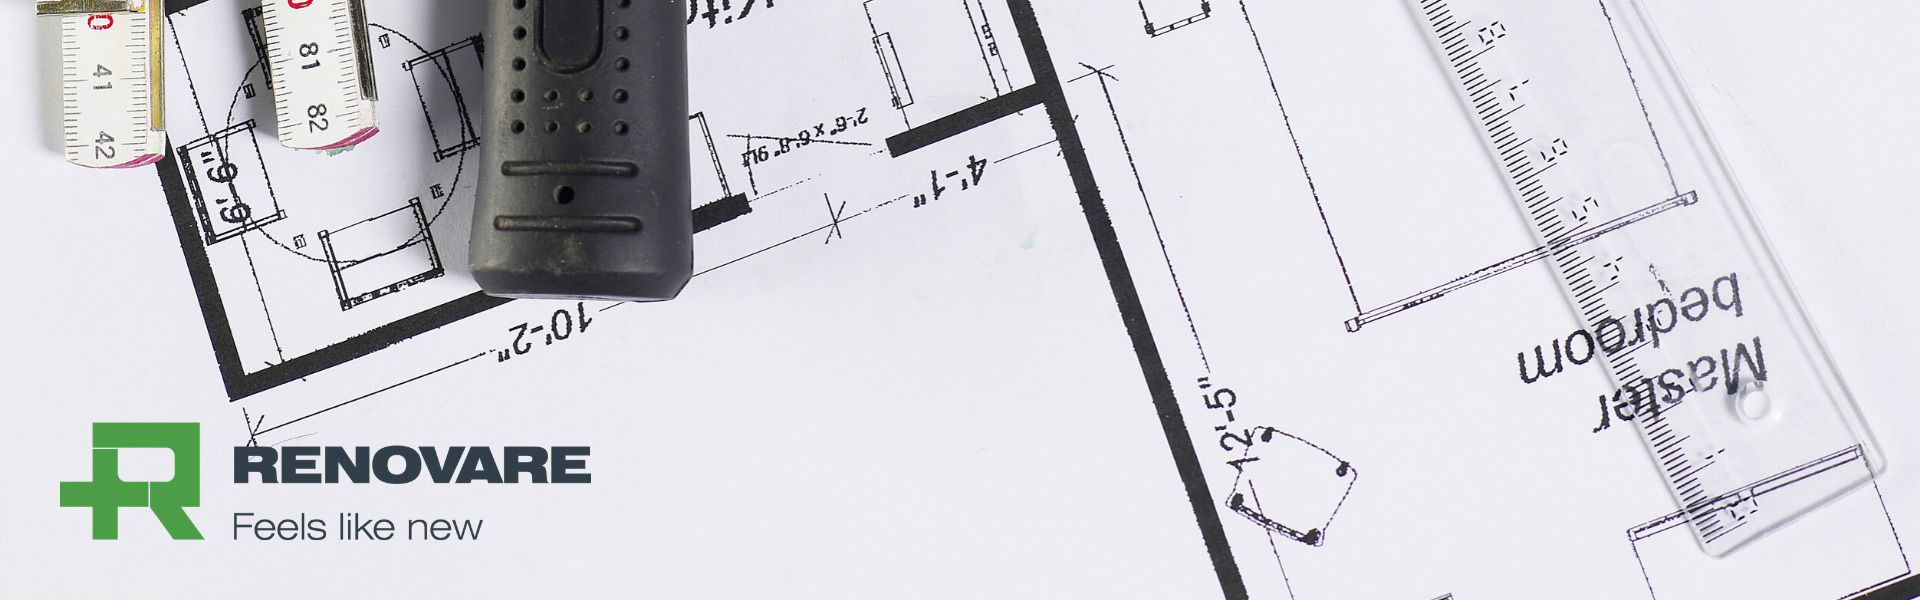 Drafting plans | Featured Image for the Renovation Plans Page by Renovare Moreton Bay.